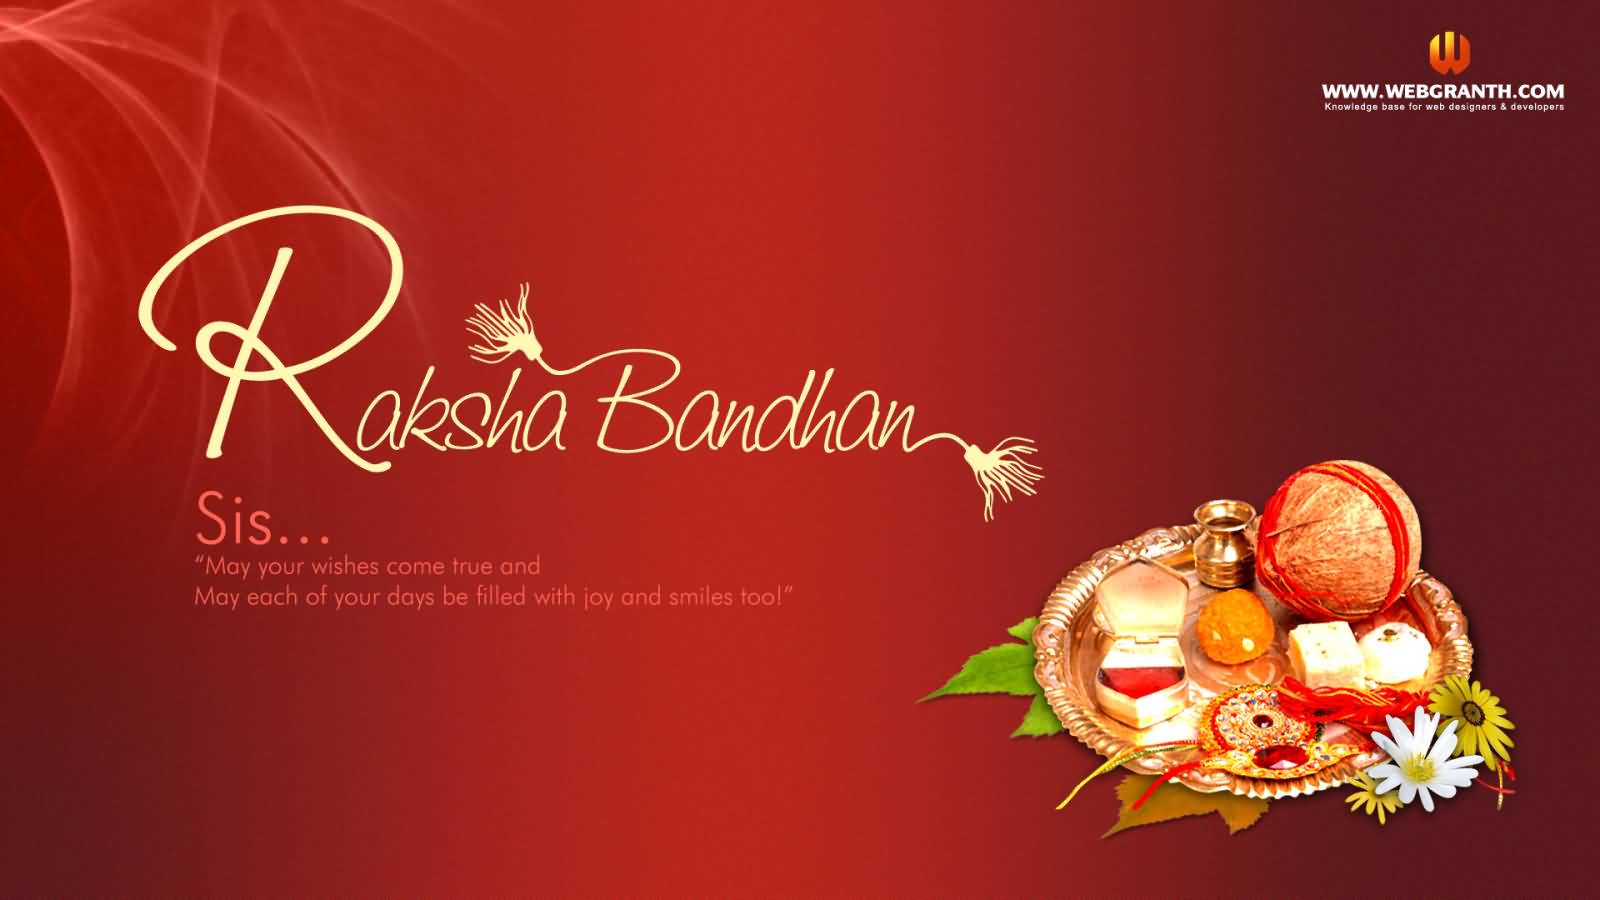 Rakshan Bandhan Sis May Your Wishes Come True And May Each Of Your Days Be Filled With Joy And Smiles Too